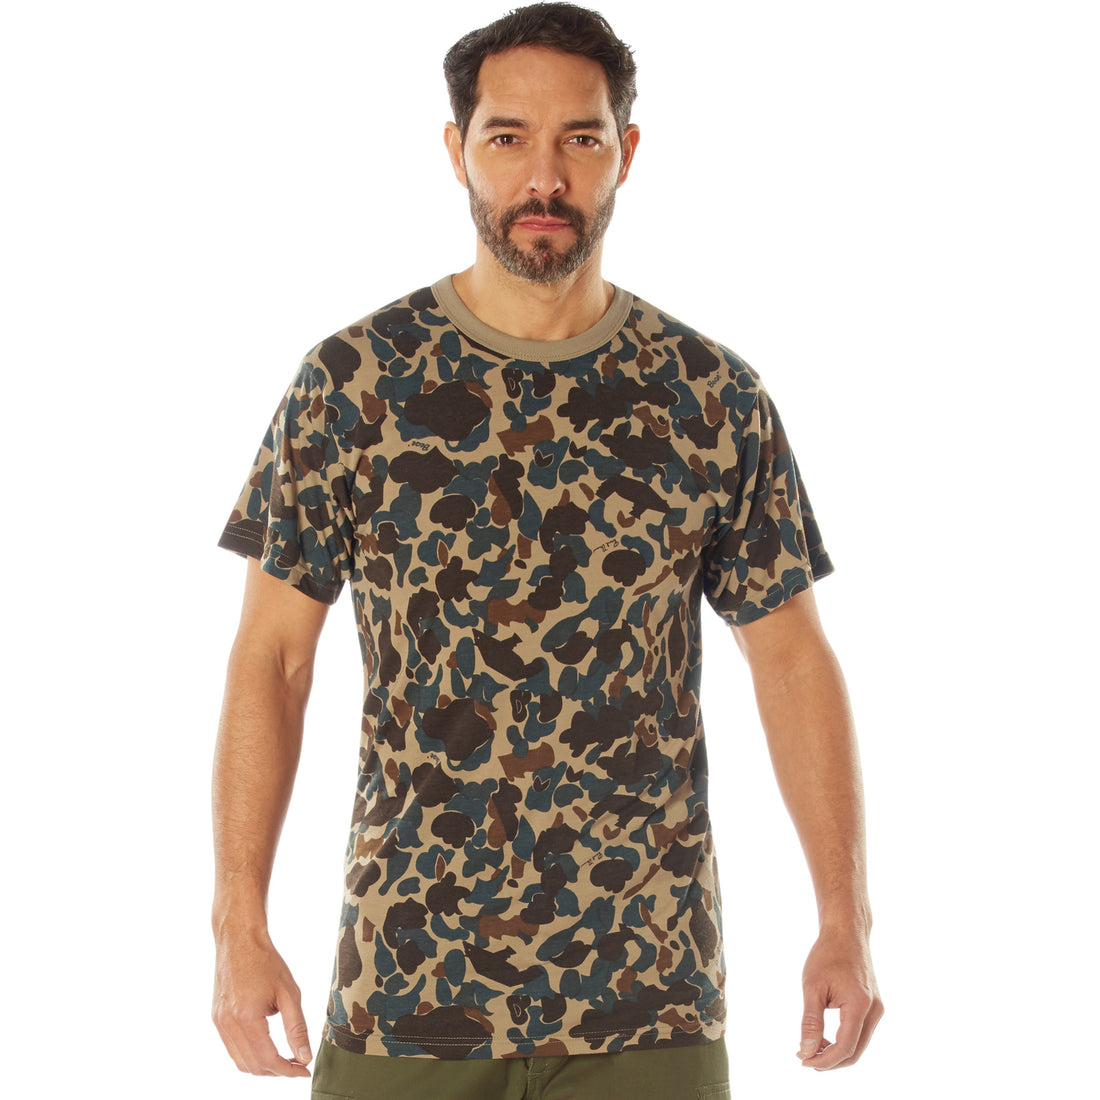 Rothco Moisture Wicking T-Shirt in Fred Bear Camo!